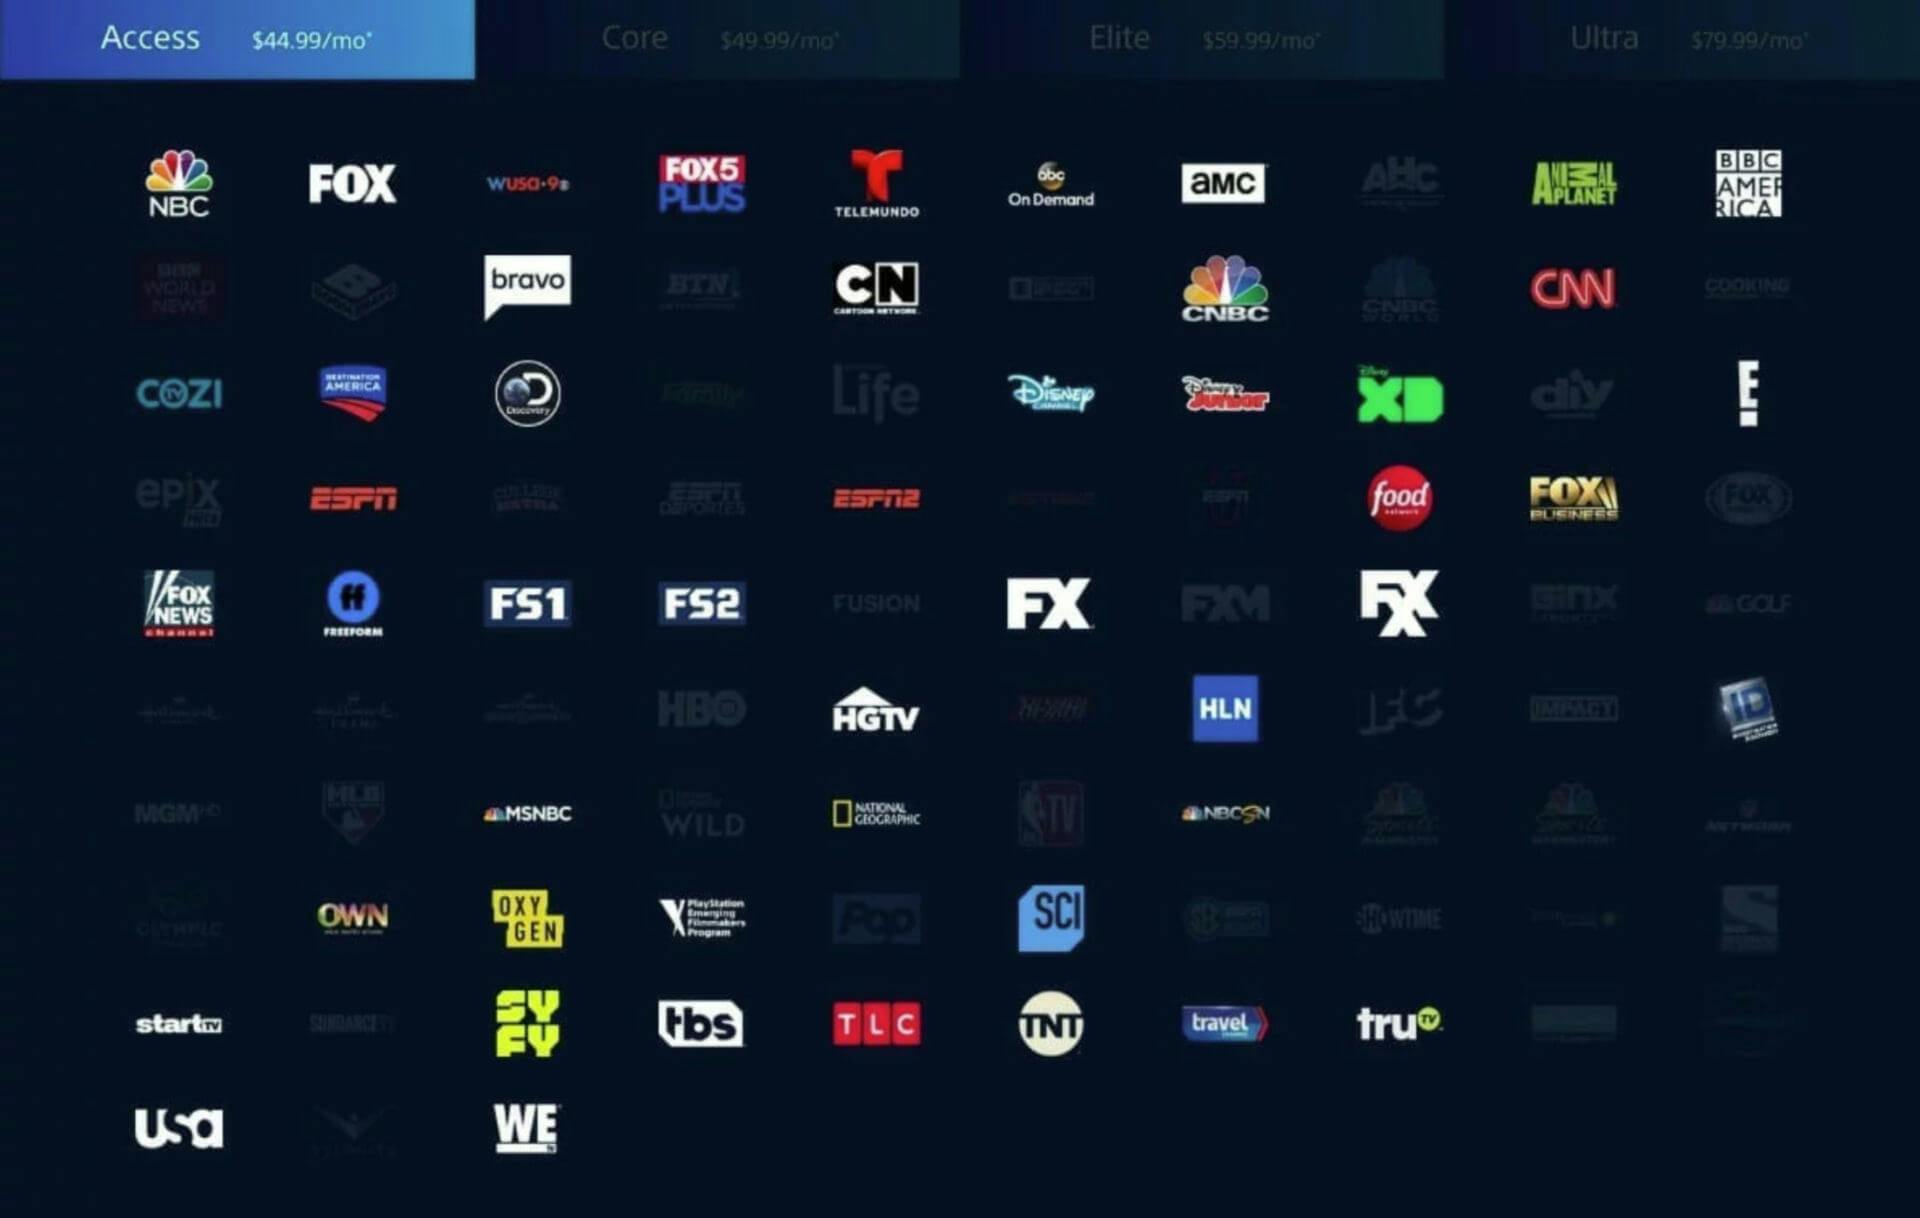 eagles lions playstation vue nfl nfc fox streaming